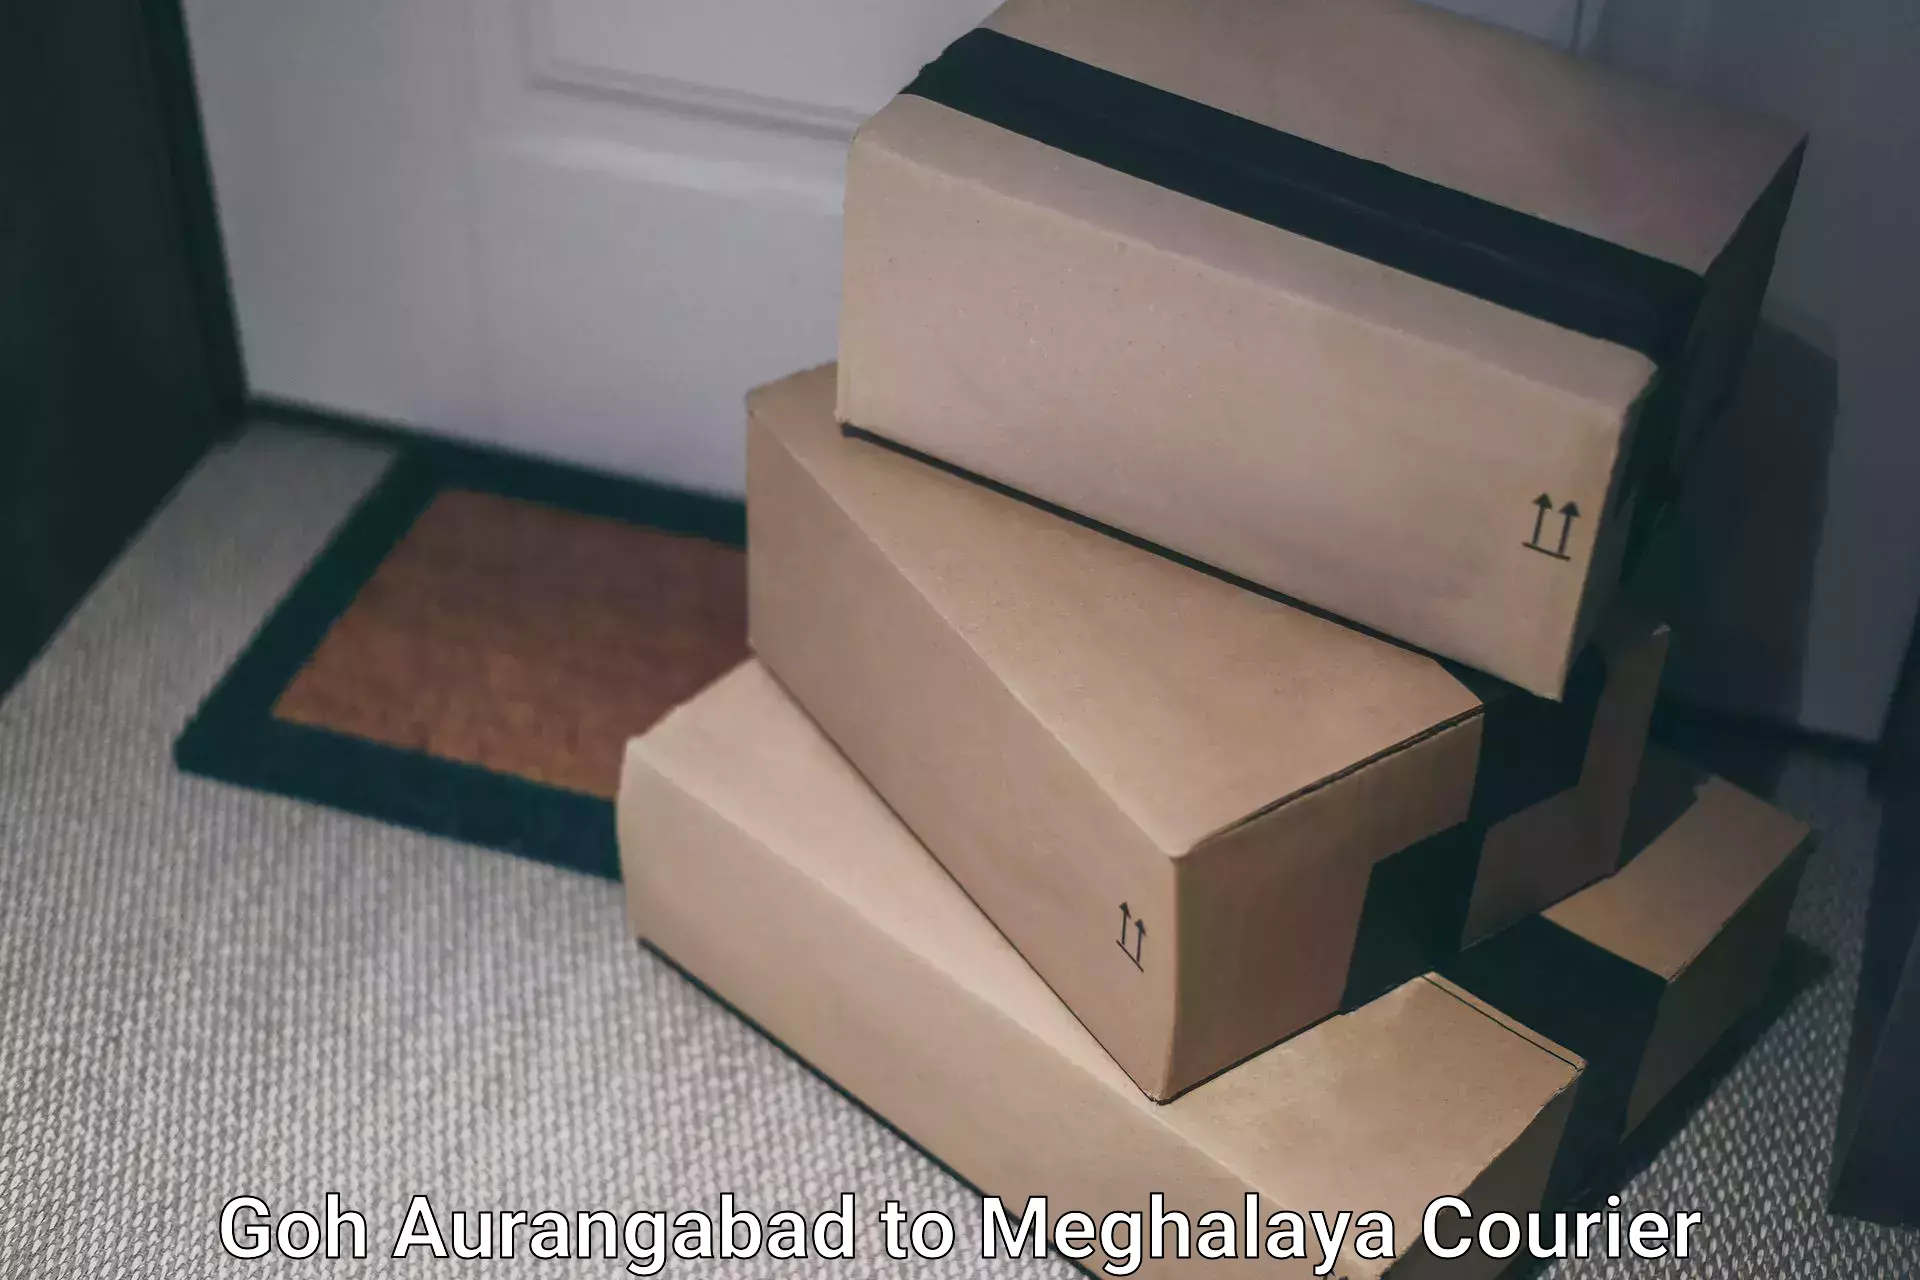 Easy access courier services Goh Aurangabad to Meghalaya